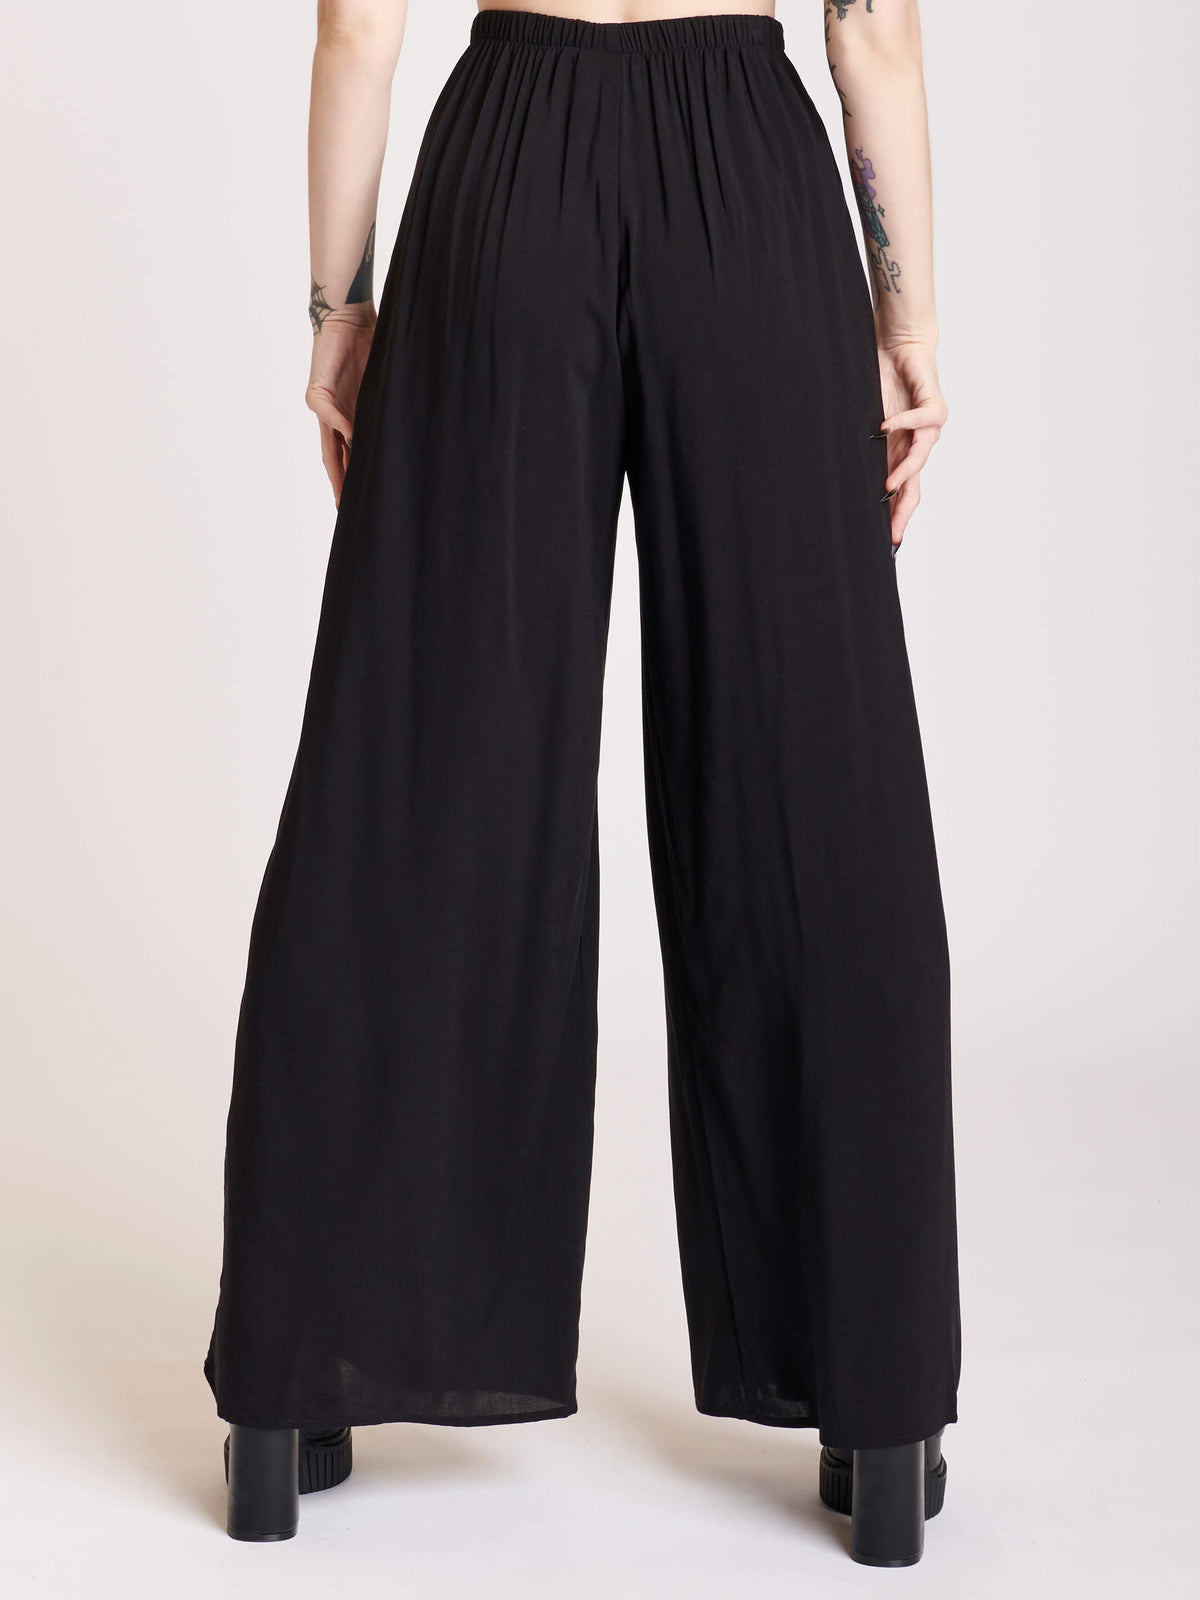 Black palazzo pants with sode lace panels